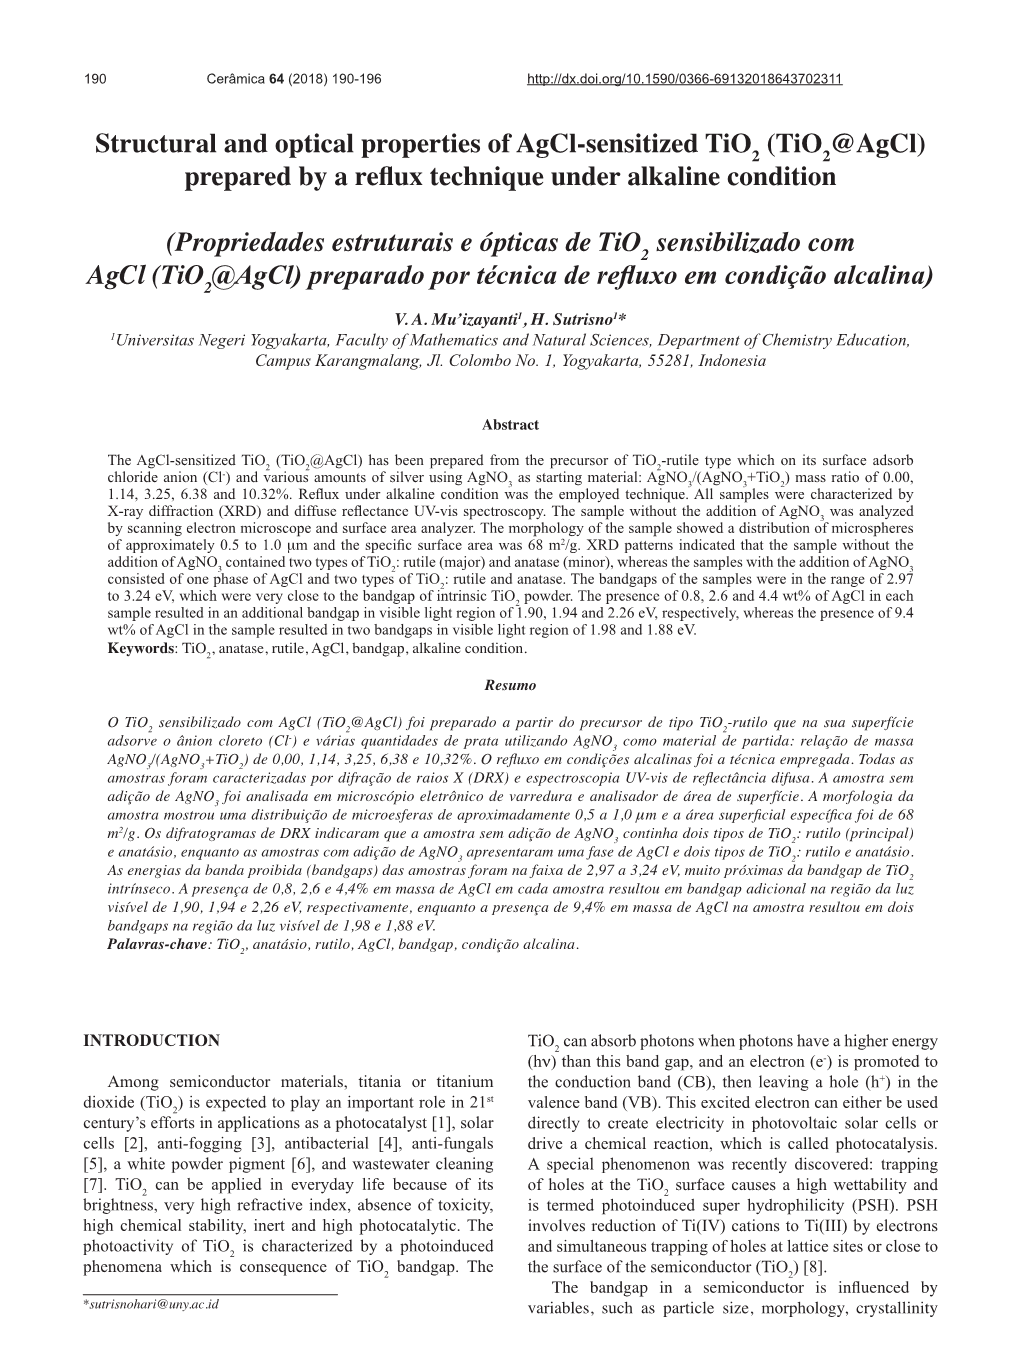 Structural and Optical Properties of Agcl-Sensitized Tio2 (Tio2@Agcl) Prepared by a Reflux Technique Under Alkaline Condition